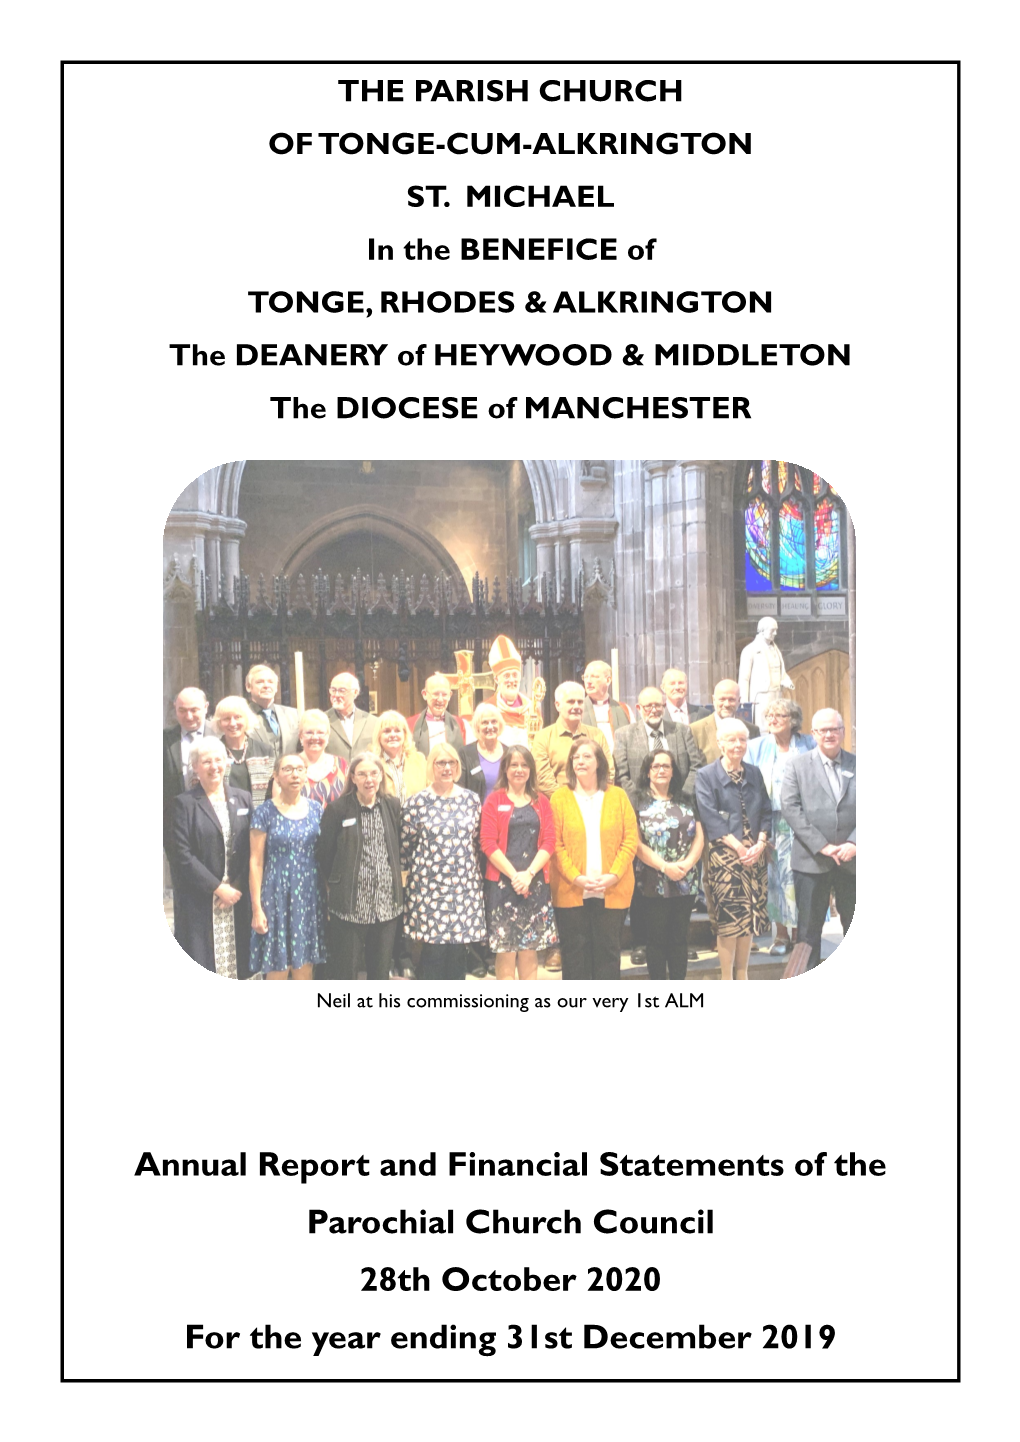 Annual Report and Financial Statements of the Parochial Church Council 28Th October 2020 for the Year Ending 31St December 2019